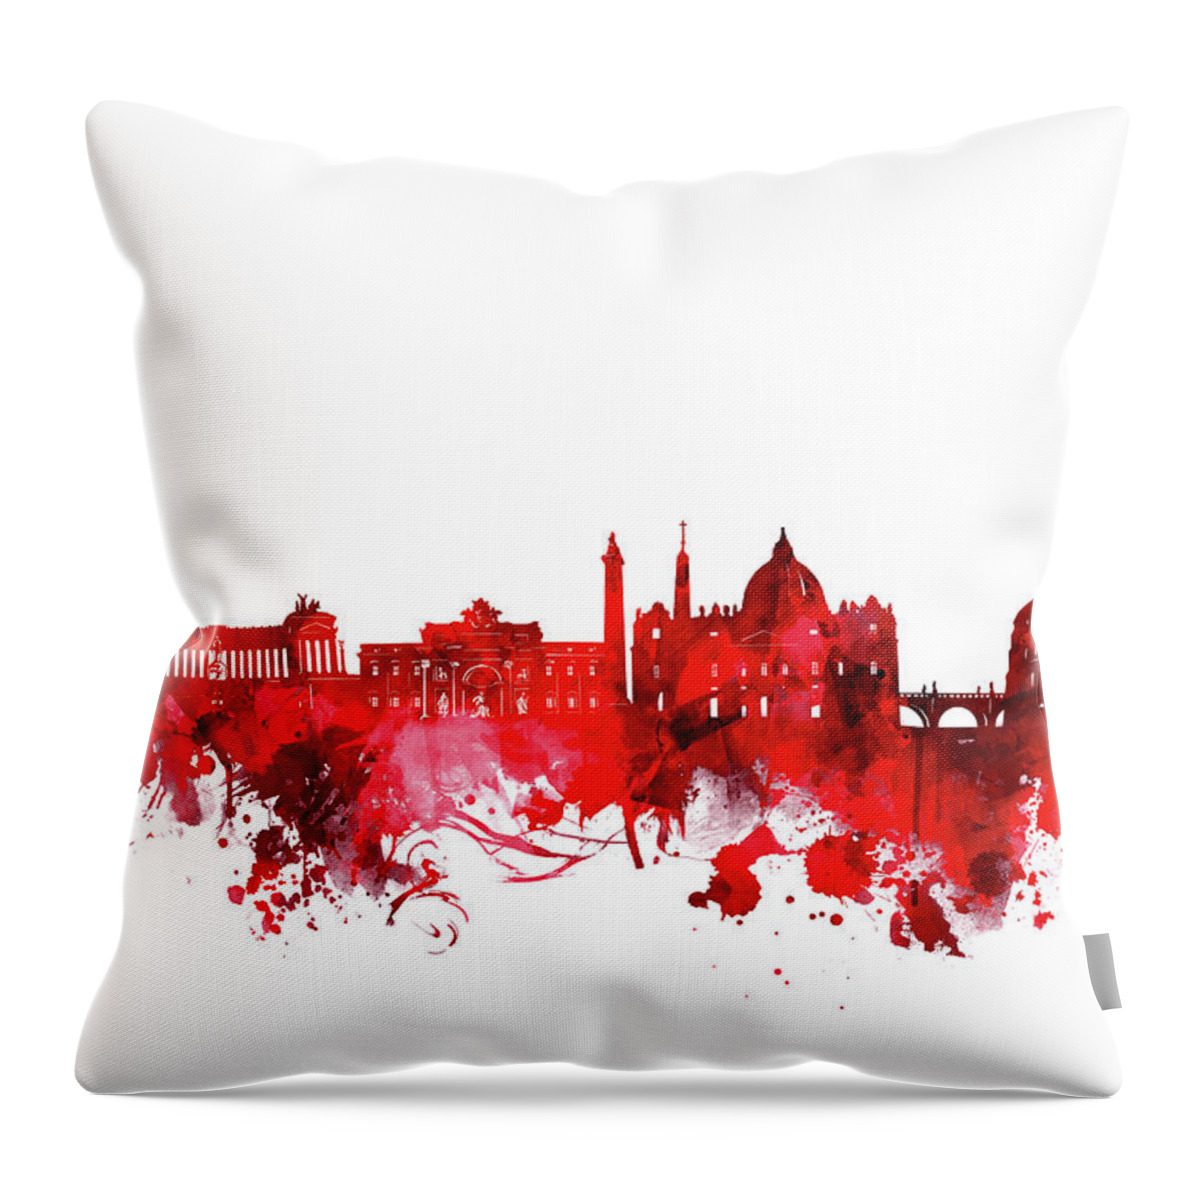 Rome Throw Pillow featuring the digital art Rome City Skyline Wateroclor Red by Bekim M